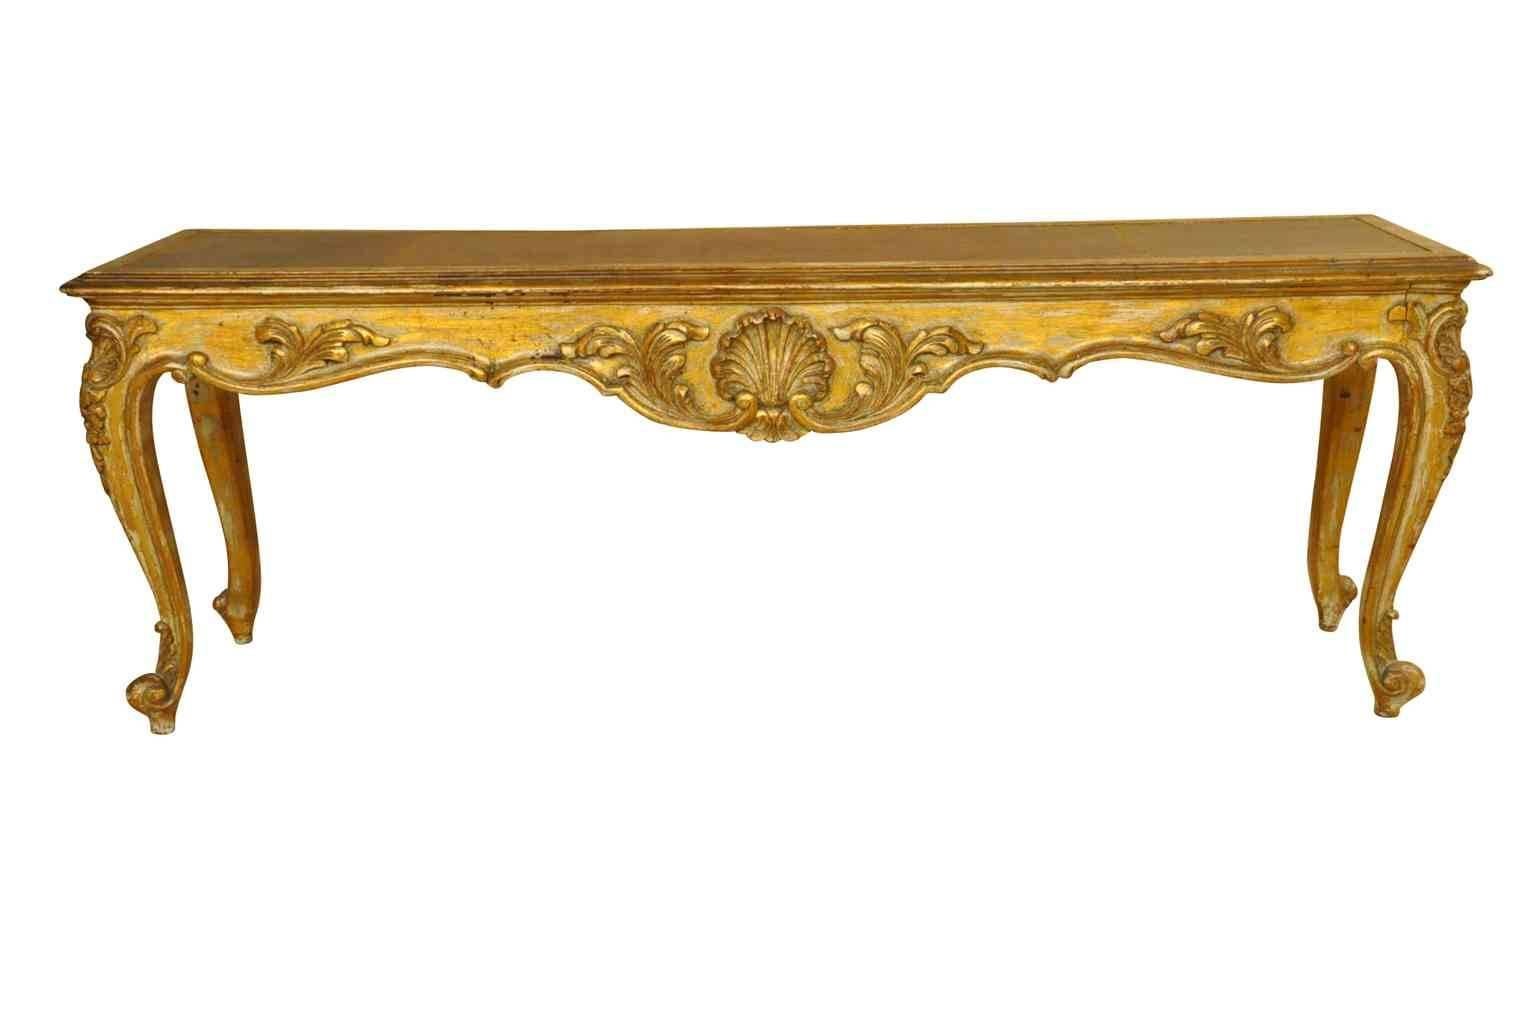 Spanish Louis XV style bench banquette handsomely constructed in giltwood with leather seat insets. A lovely accessory, perfect at the foot of a bed.